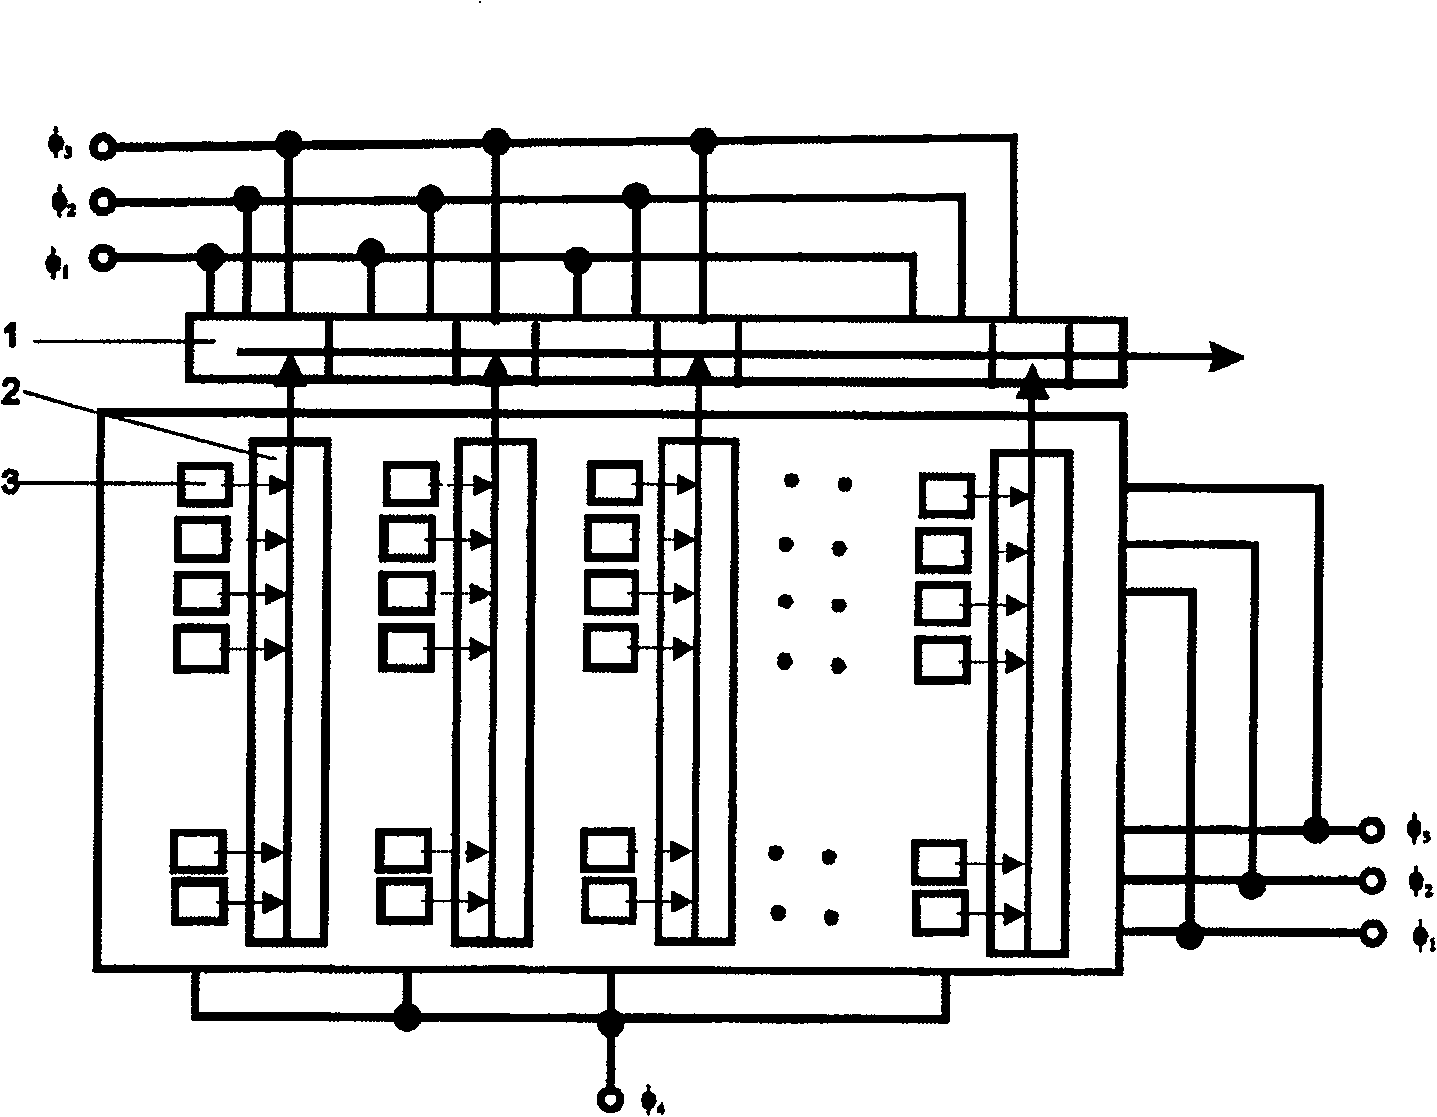 Circuitous transition surface array charge-coupled device